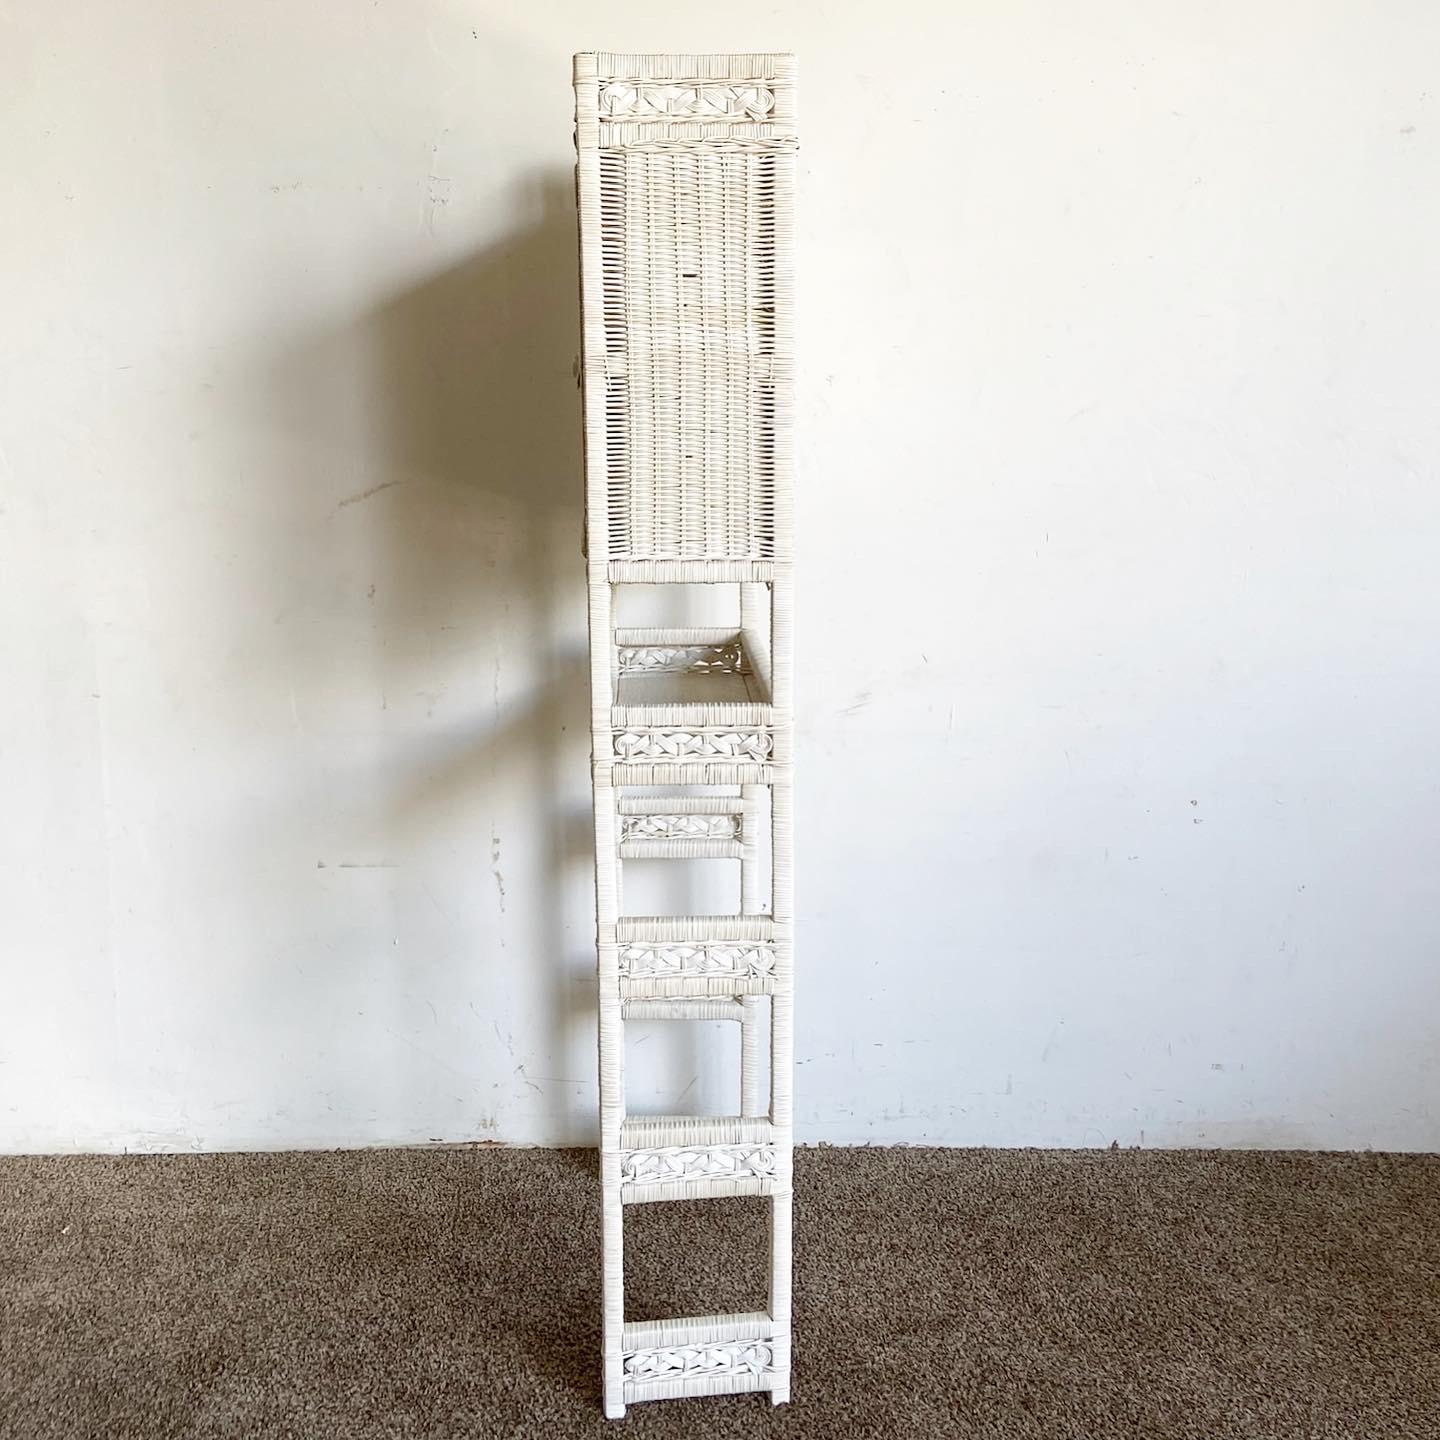 The Boho Chic White Rattan and Wicker Bathroom Storage Etagere offers an ideal storage solution while bringing a touch of bohemian charm to your bathroom. Made from sturdy wicker and natural rattan, this etagere perfectly balances functionality with